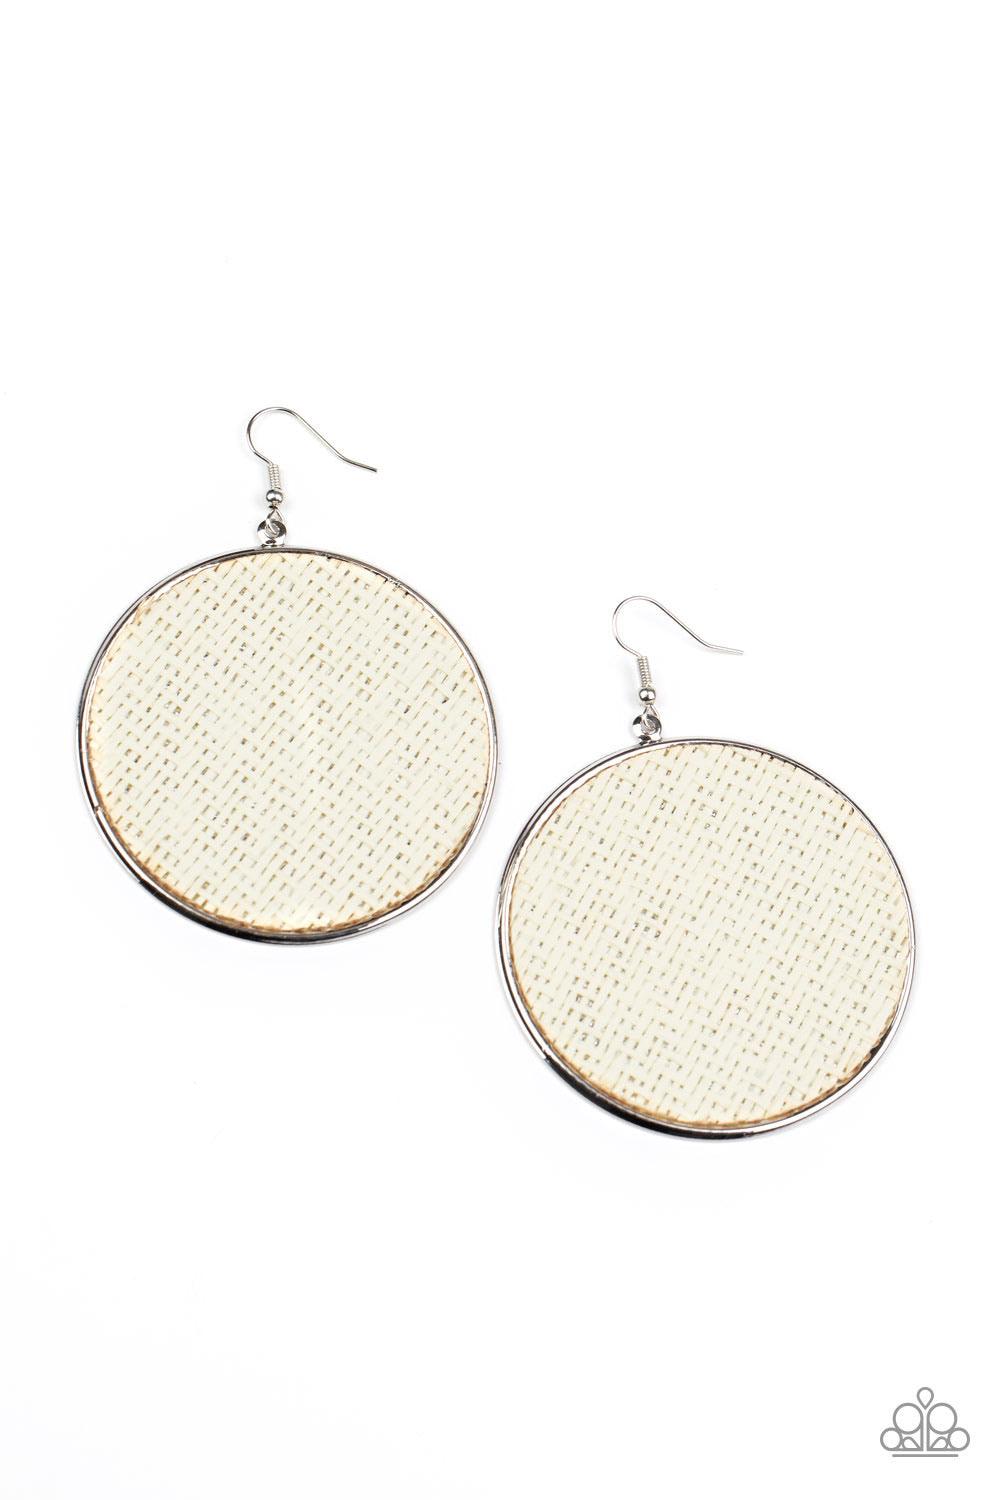 Paparazzi Accessories Wonderfully Woven - White White twine-like cording weaves across the front of an oversized silver disc for an earthy flair. Earring attaches to a standard fishhook fitting. Sold as one pair of earrings. Jewelry